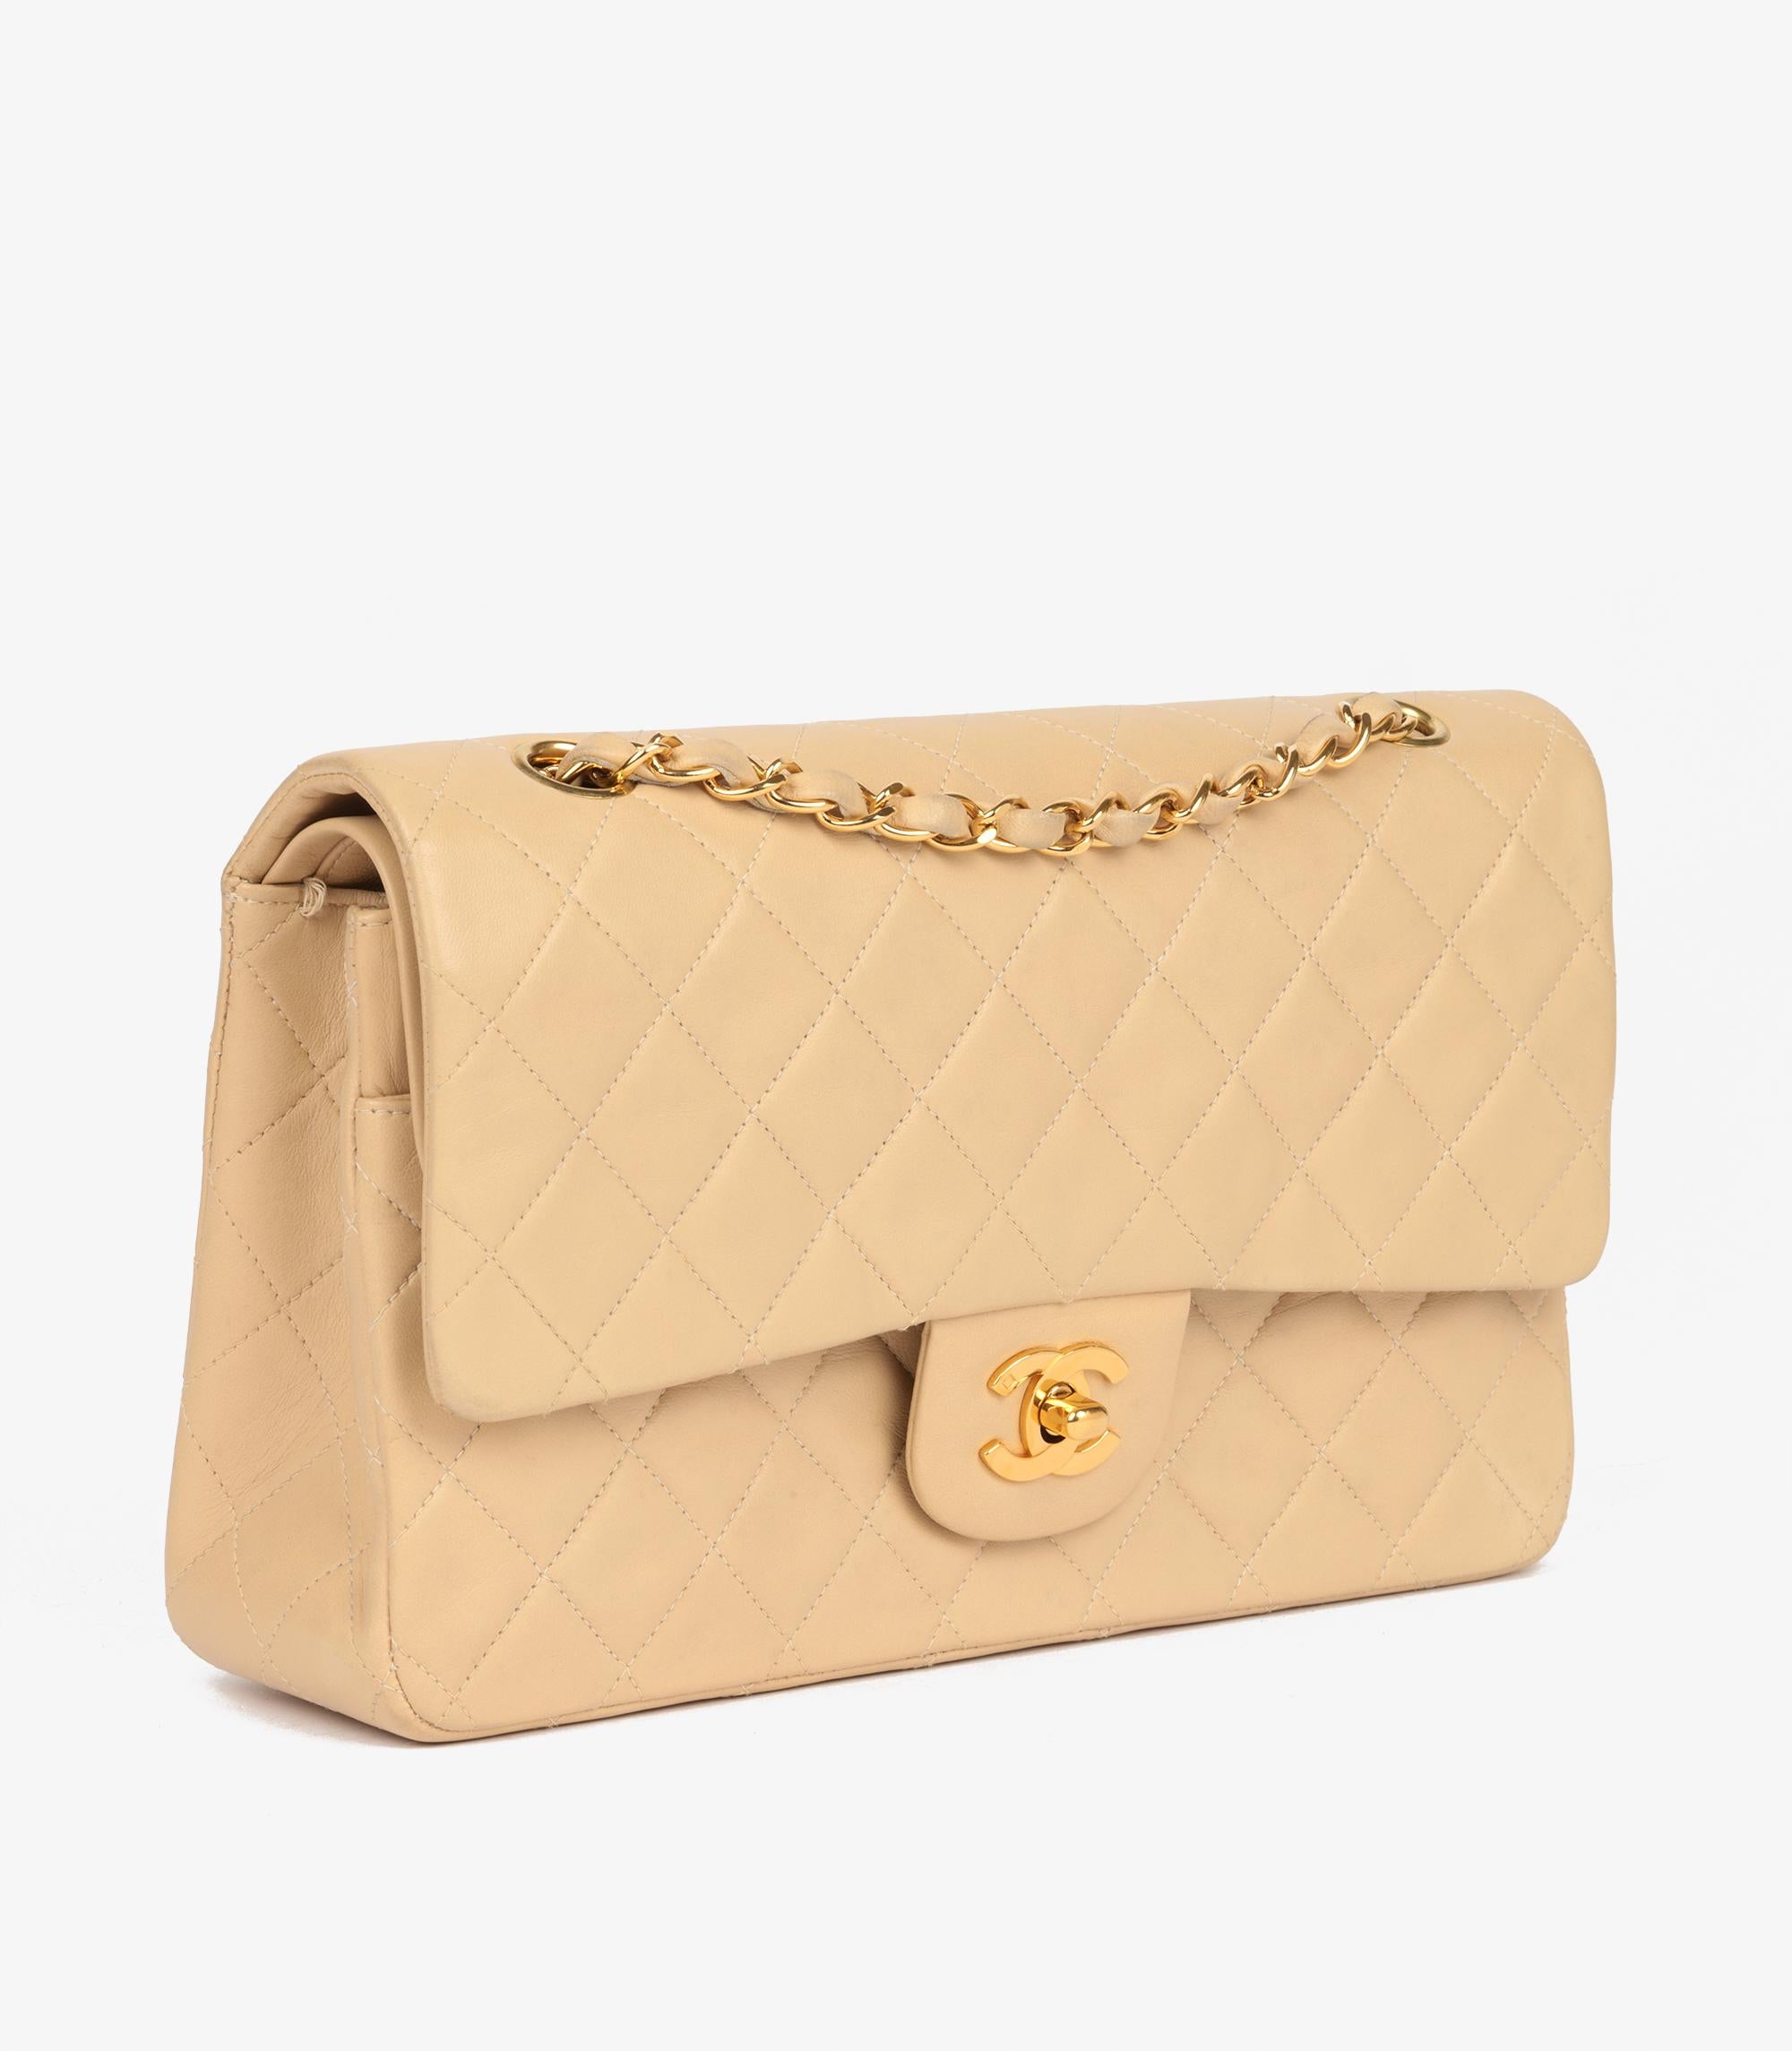 Chanel Beige Quilted Lambskin Vintage Medium Classic Double Flap Bag

Brand- Chanel
Model- Medium Classic Double Flap Bag
Product Type- Shoulder
Serial Number- 4163789
Age- Circa 1996
Accompanied By-Chanel Dust Bag, Authenticity Card
Colour-